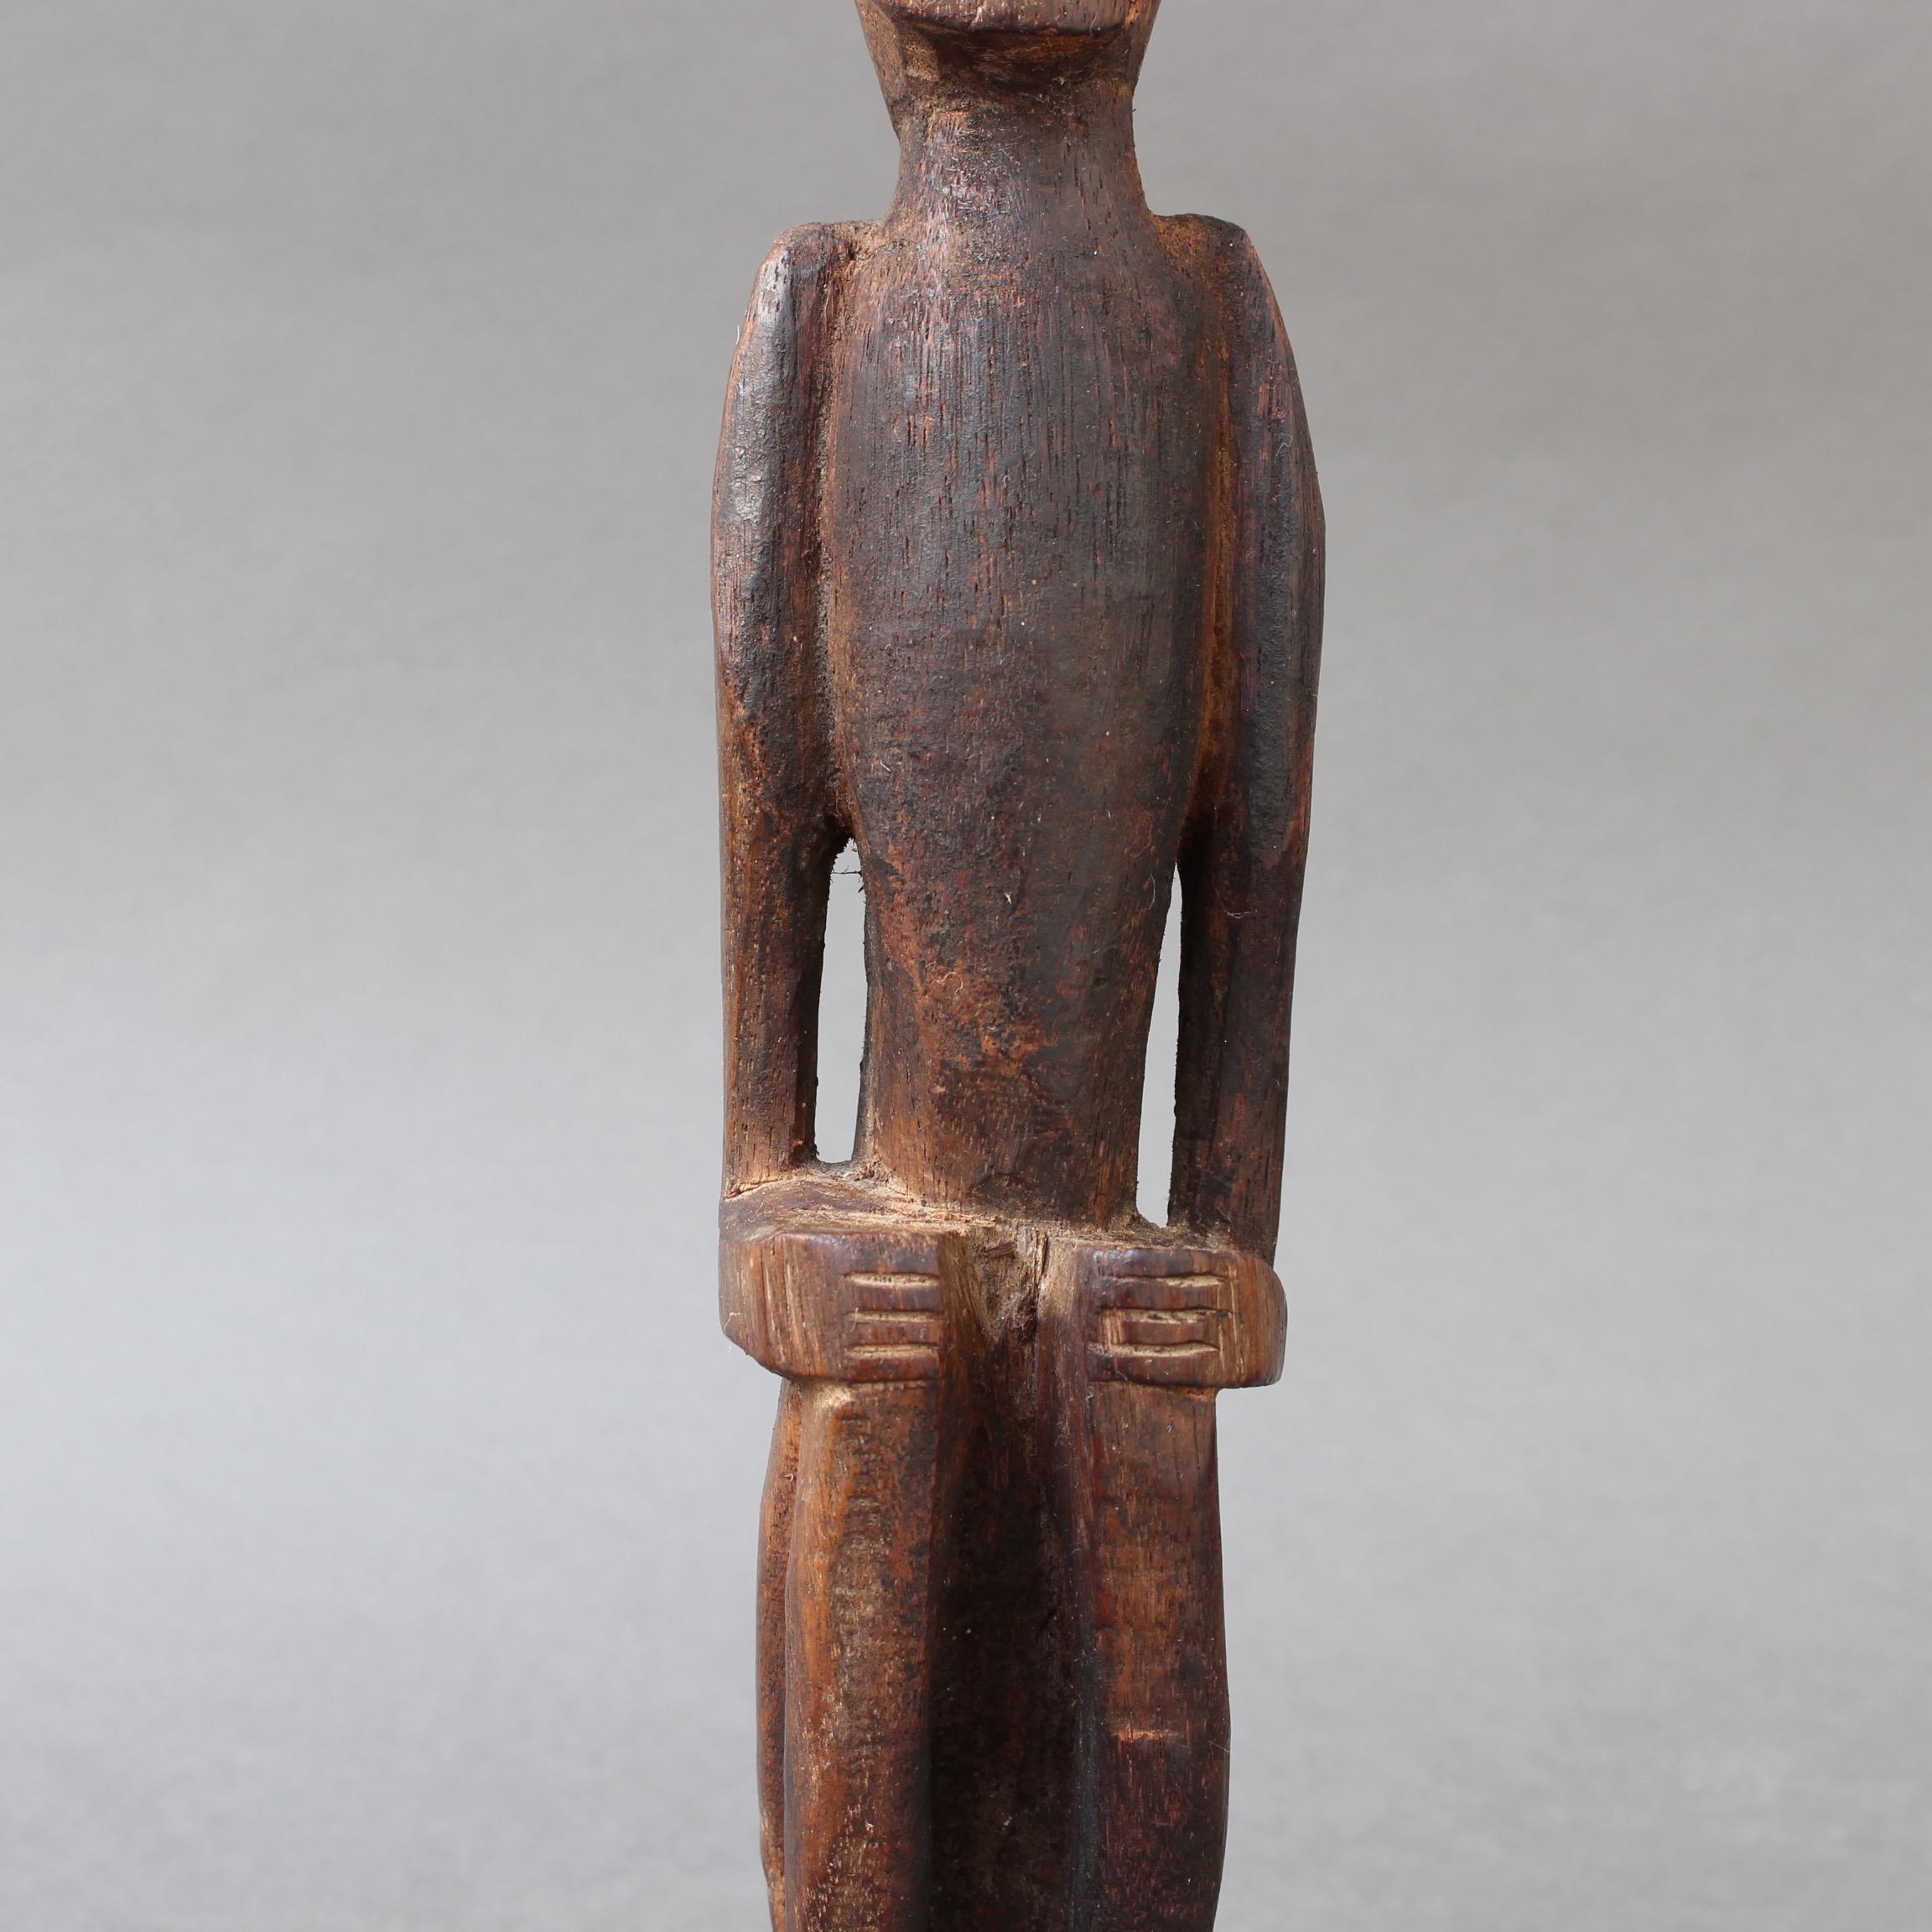 Wooden Sculpture or Carving of Sitting Figure from Sumba Island, Indonesia 12